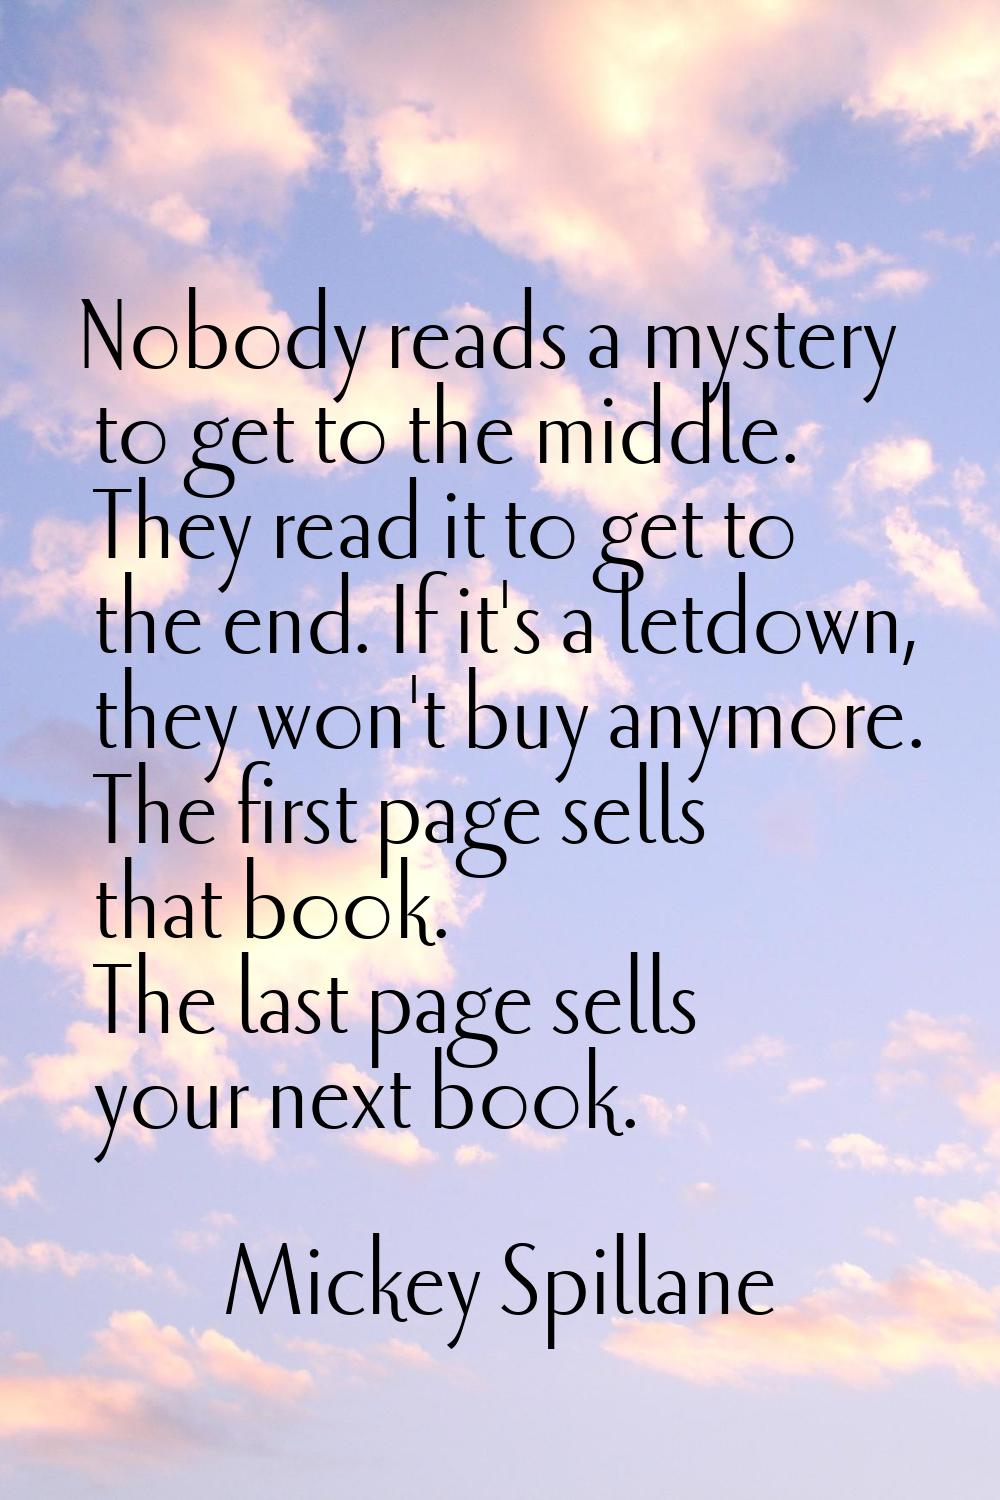 Nobody reads a mystery to get to the middle. They read it to get to the end. If it's a letdown, the